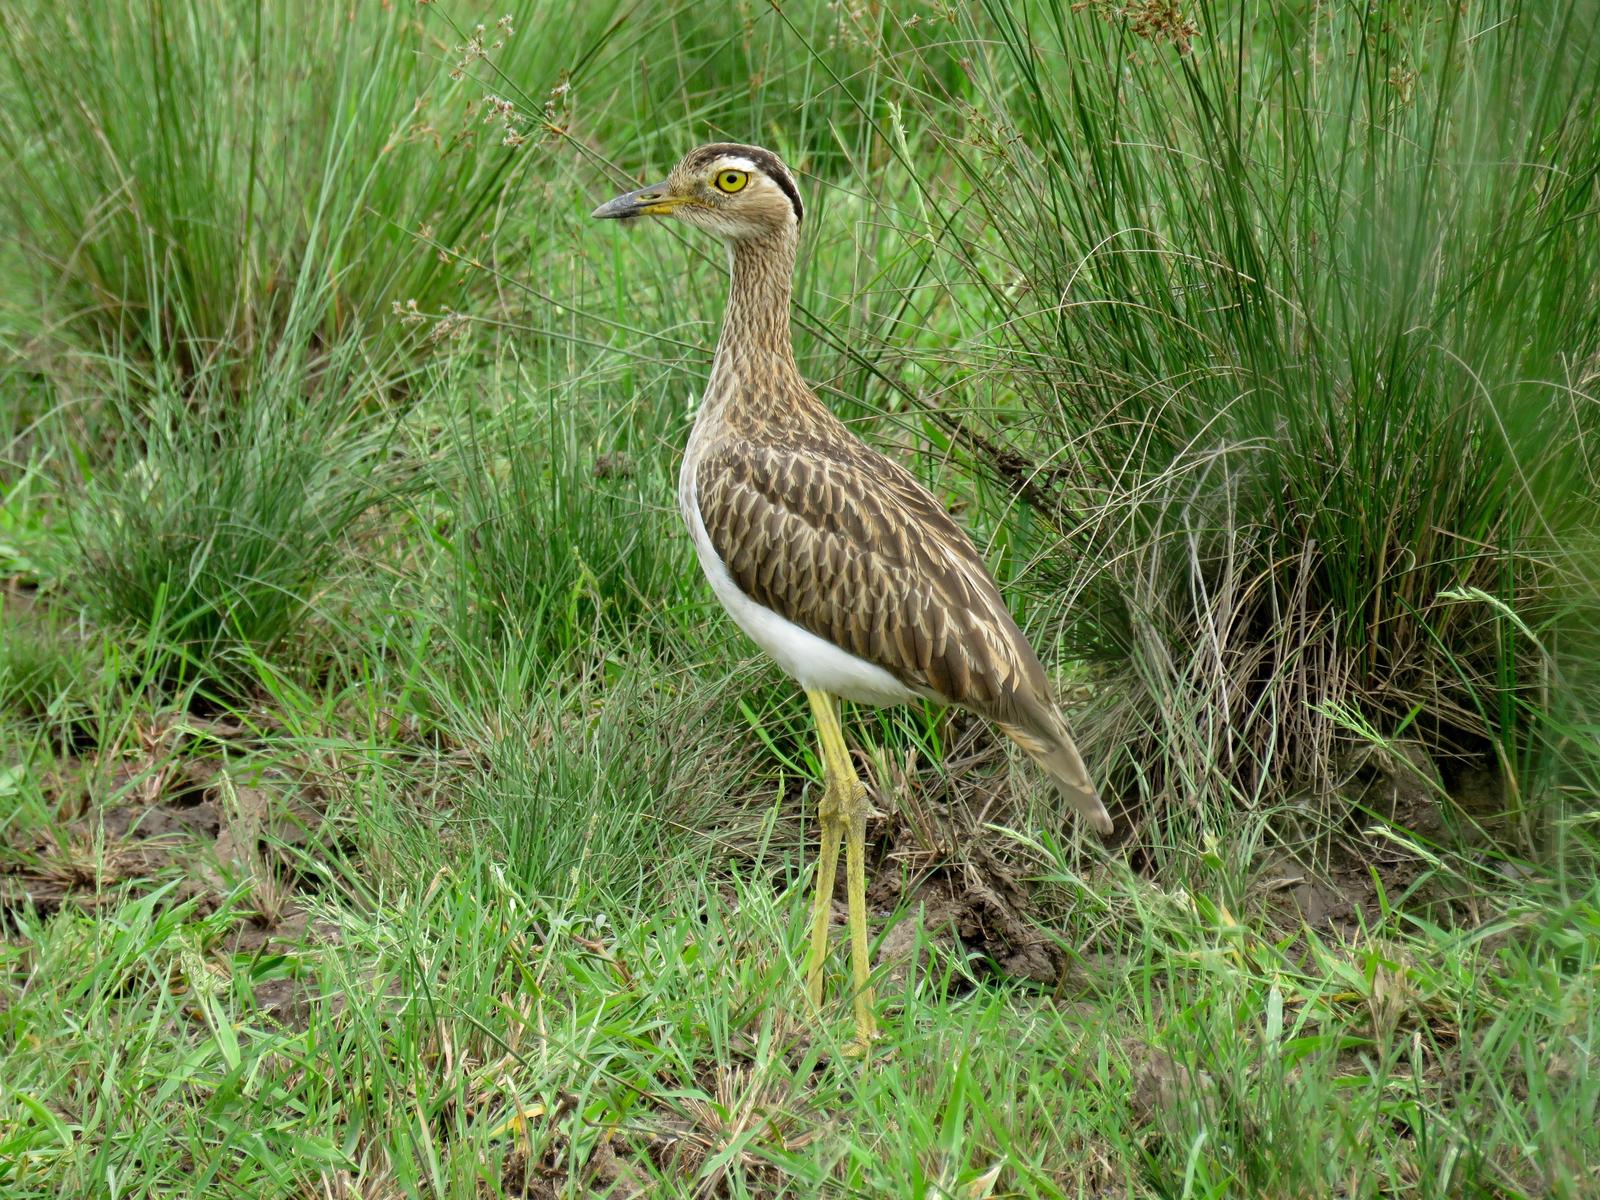 Double-striped Thick-knee Photo by John van Dort